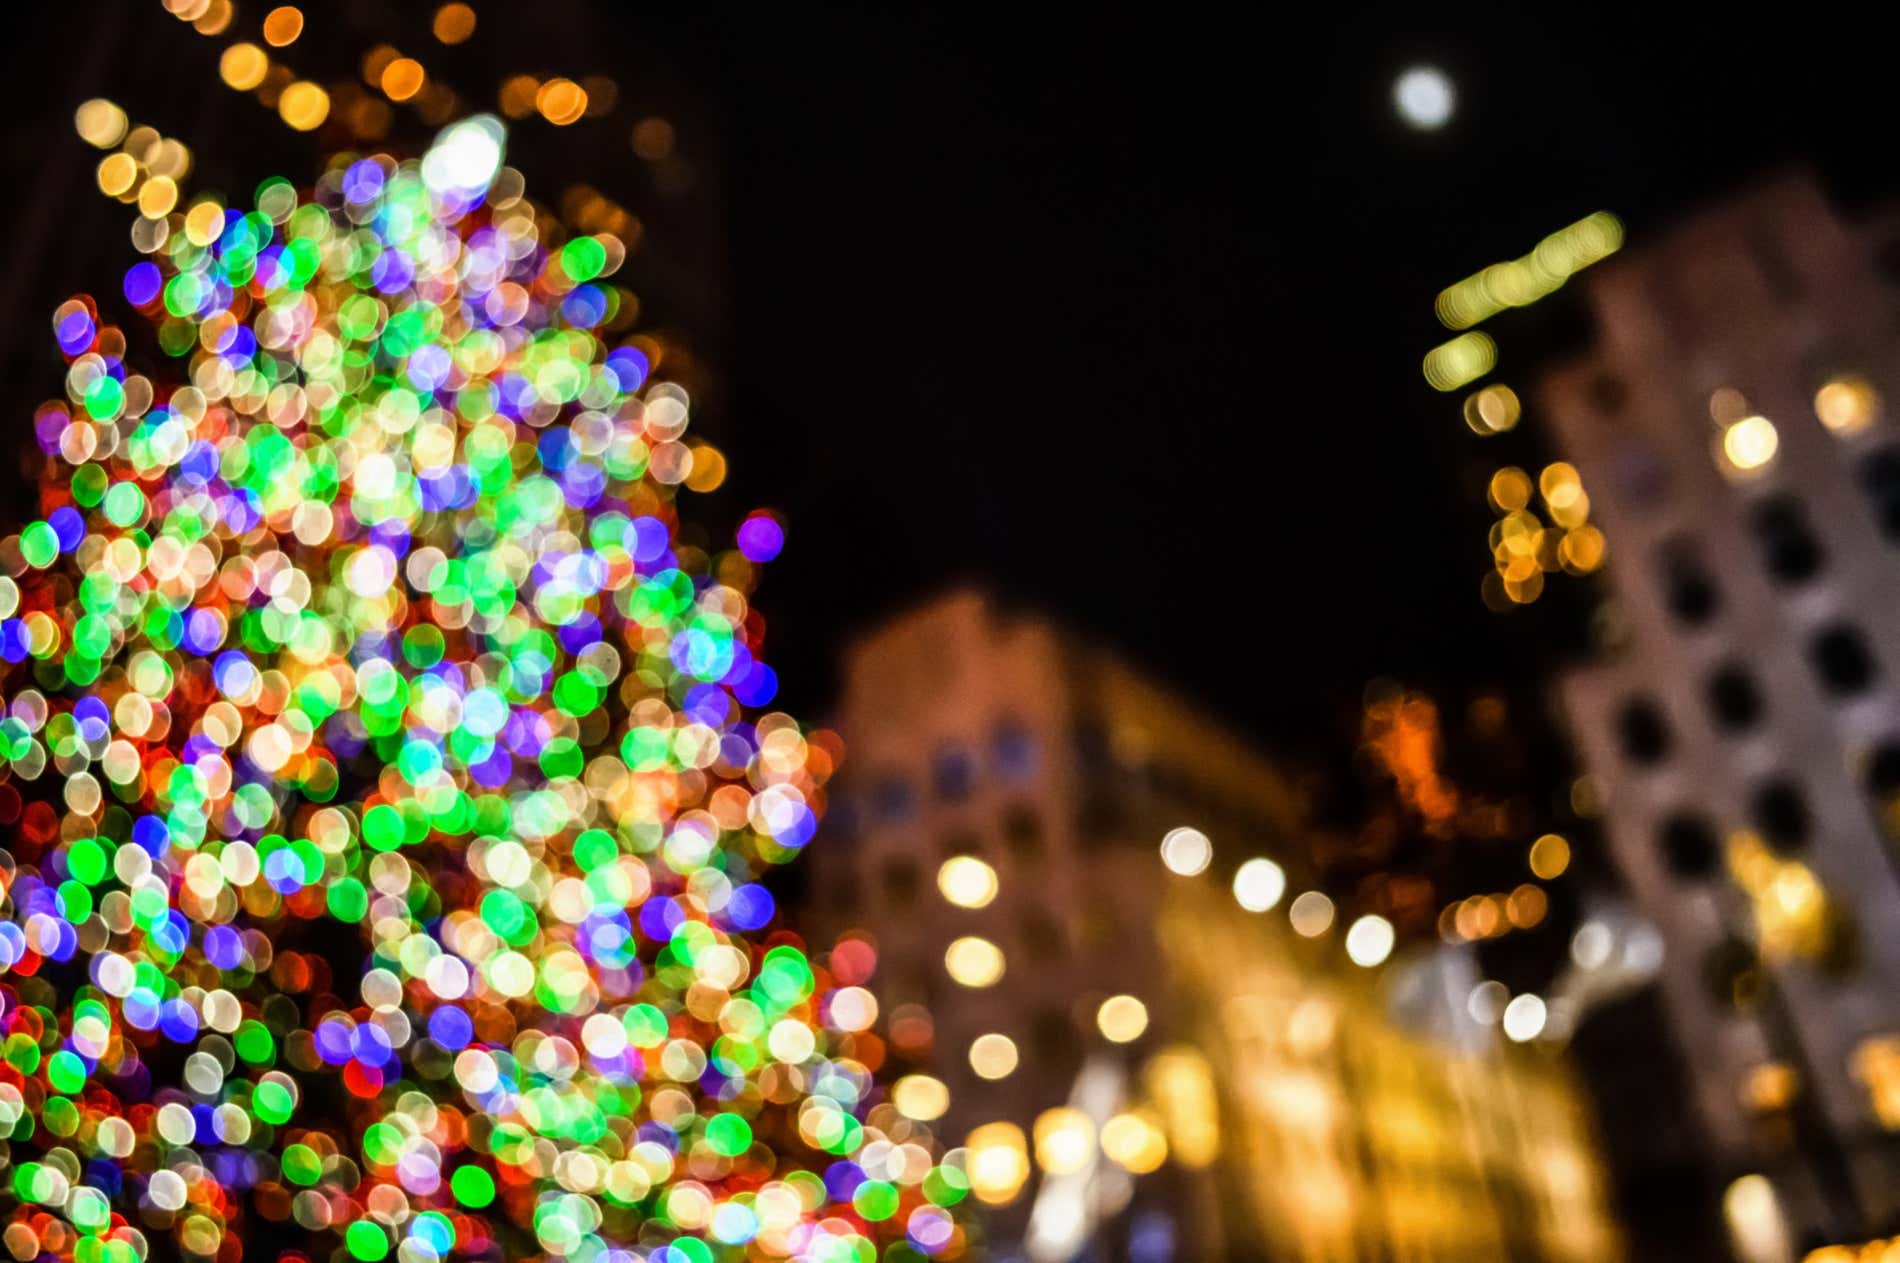 An out of focus picture of the Rockefeller Center Christmas Tree